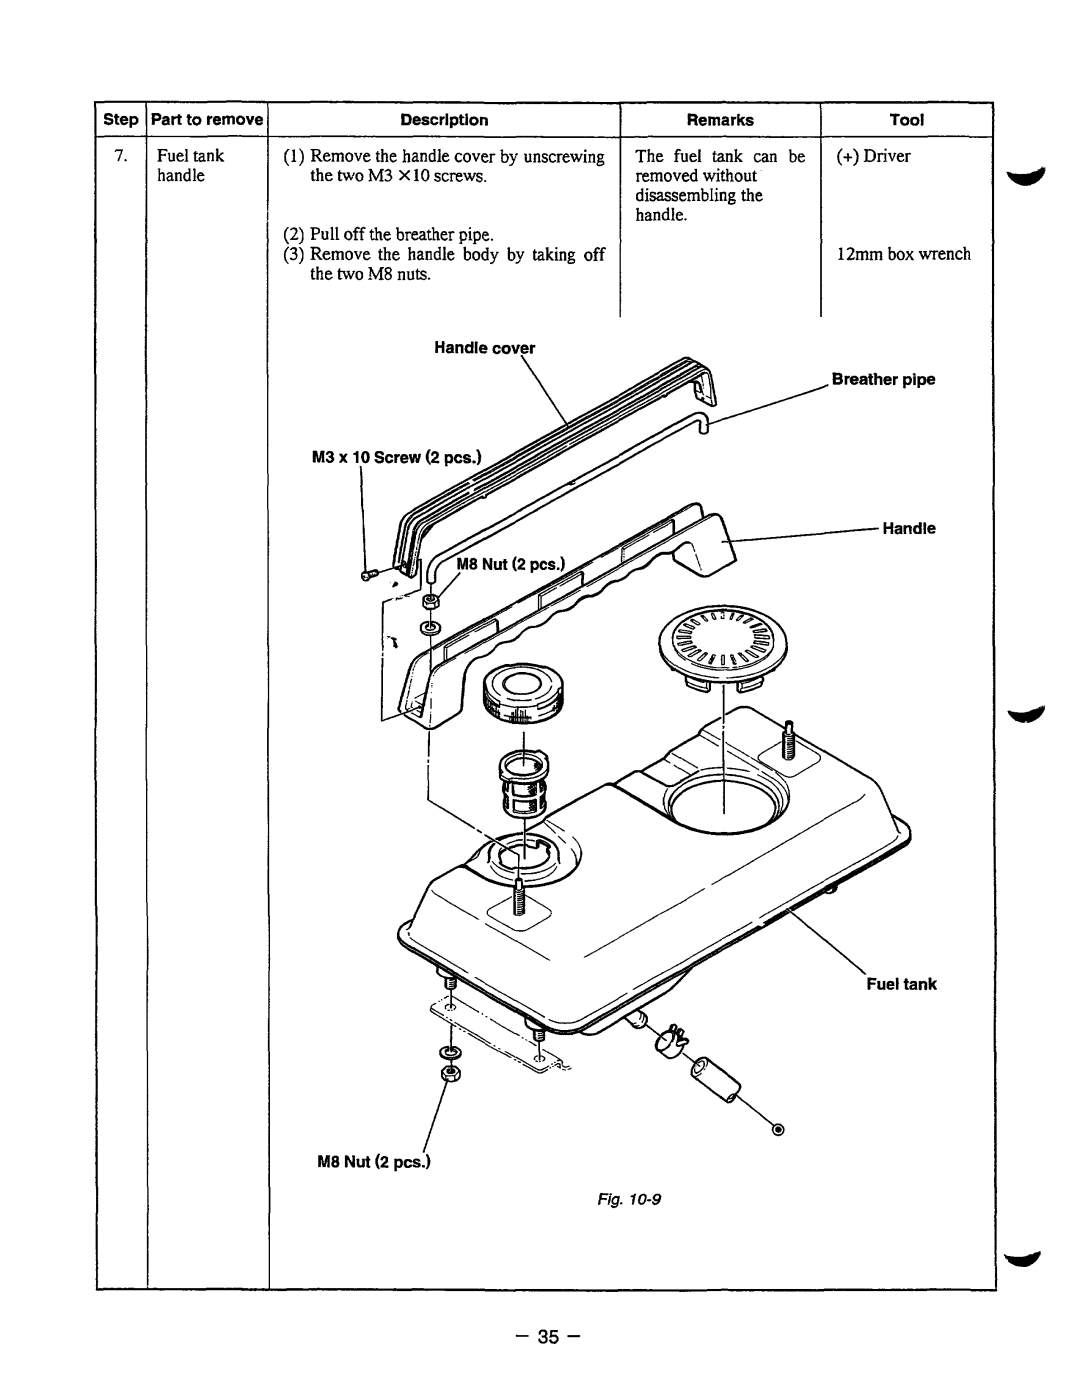 Baldor BALDOR GENERATOR, PC13R manual the two M8 nuts, Remove the handle coverby unscrewing 